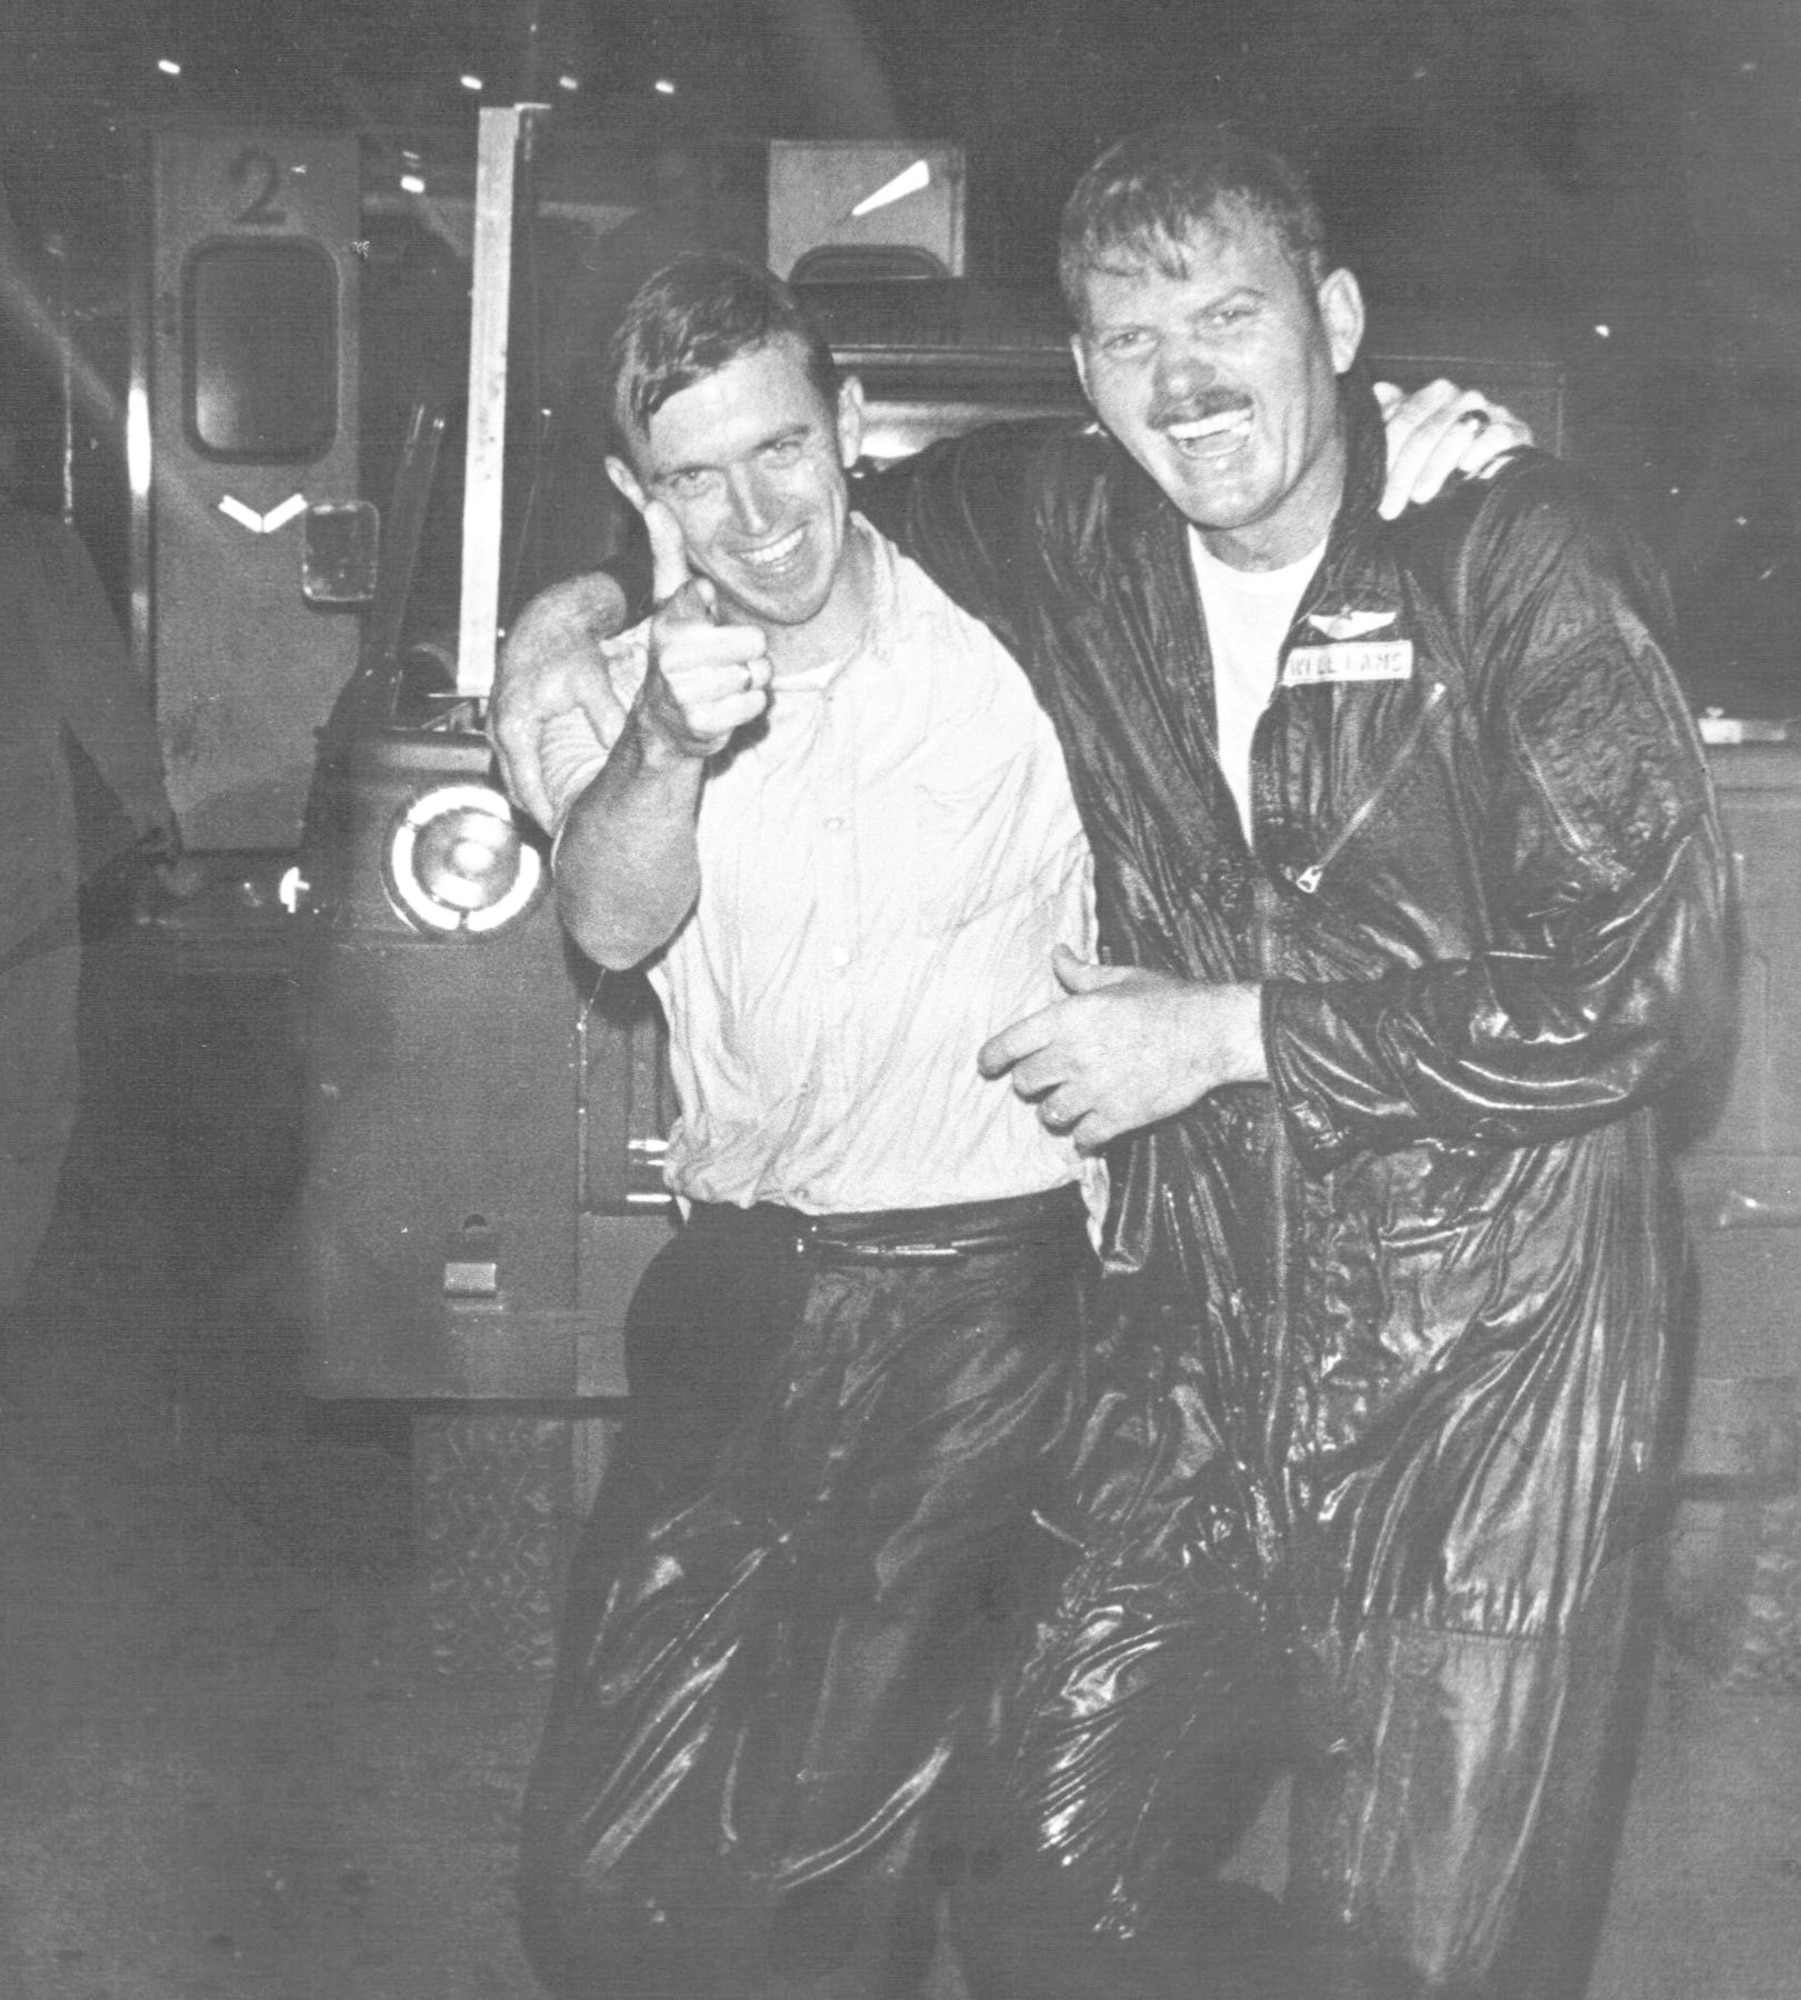 Wet from the traditional last-mission hose down, Maj. Dick Williams (left) and Maj. Thomas Stack celebrate completing their tour. (U.S. Air Force photo)